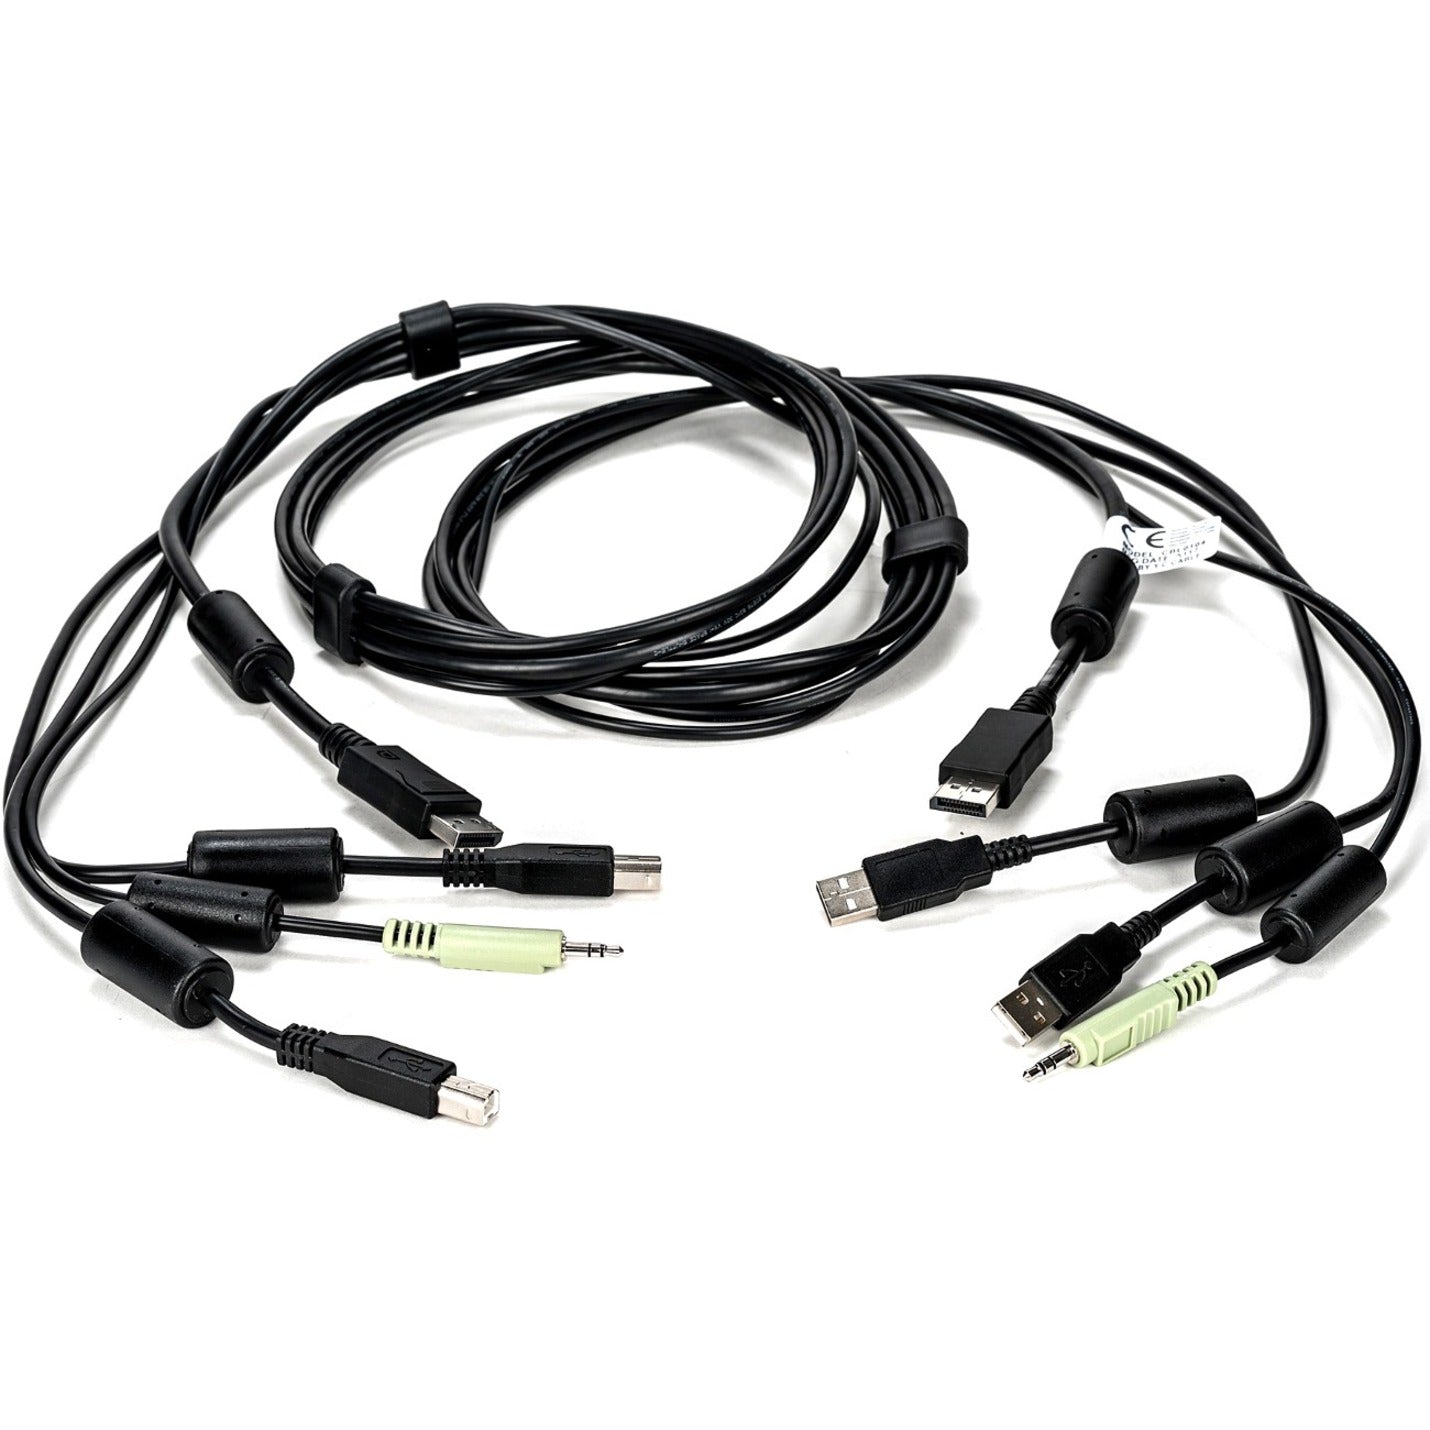 AVOCENT CBL0104 SC845D Cable - 6ft, USB Keyboard and Mouse, DisplayPort and Audio Cable